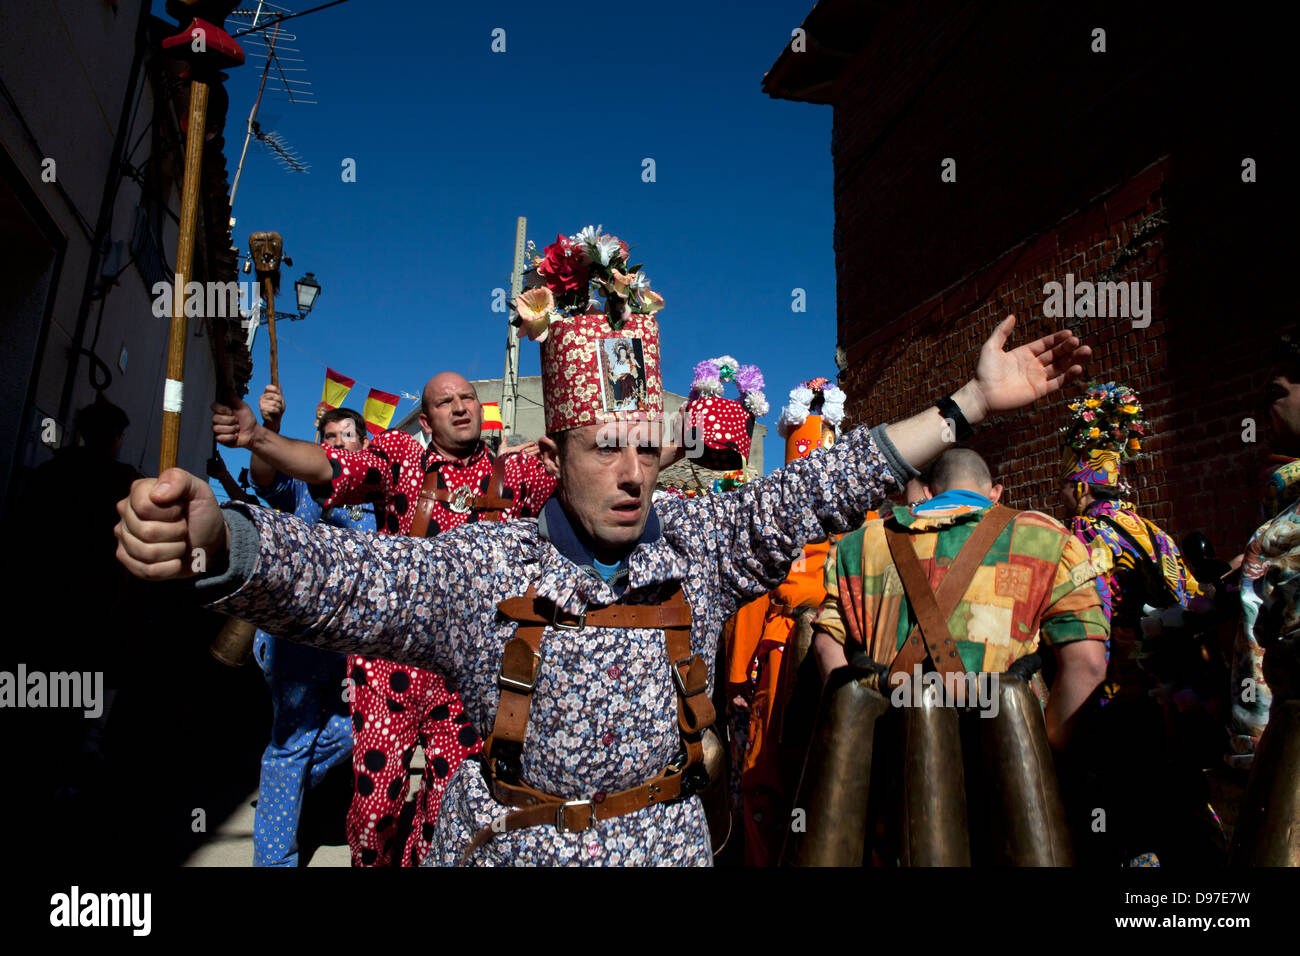 A group of 'devils' cross the streets of town dancing and screaming Stock Photo